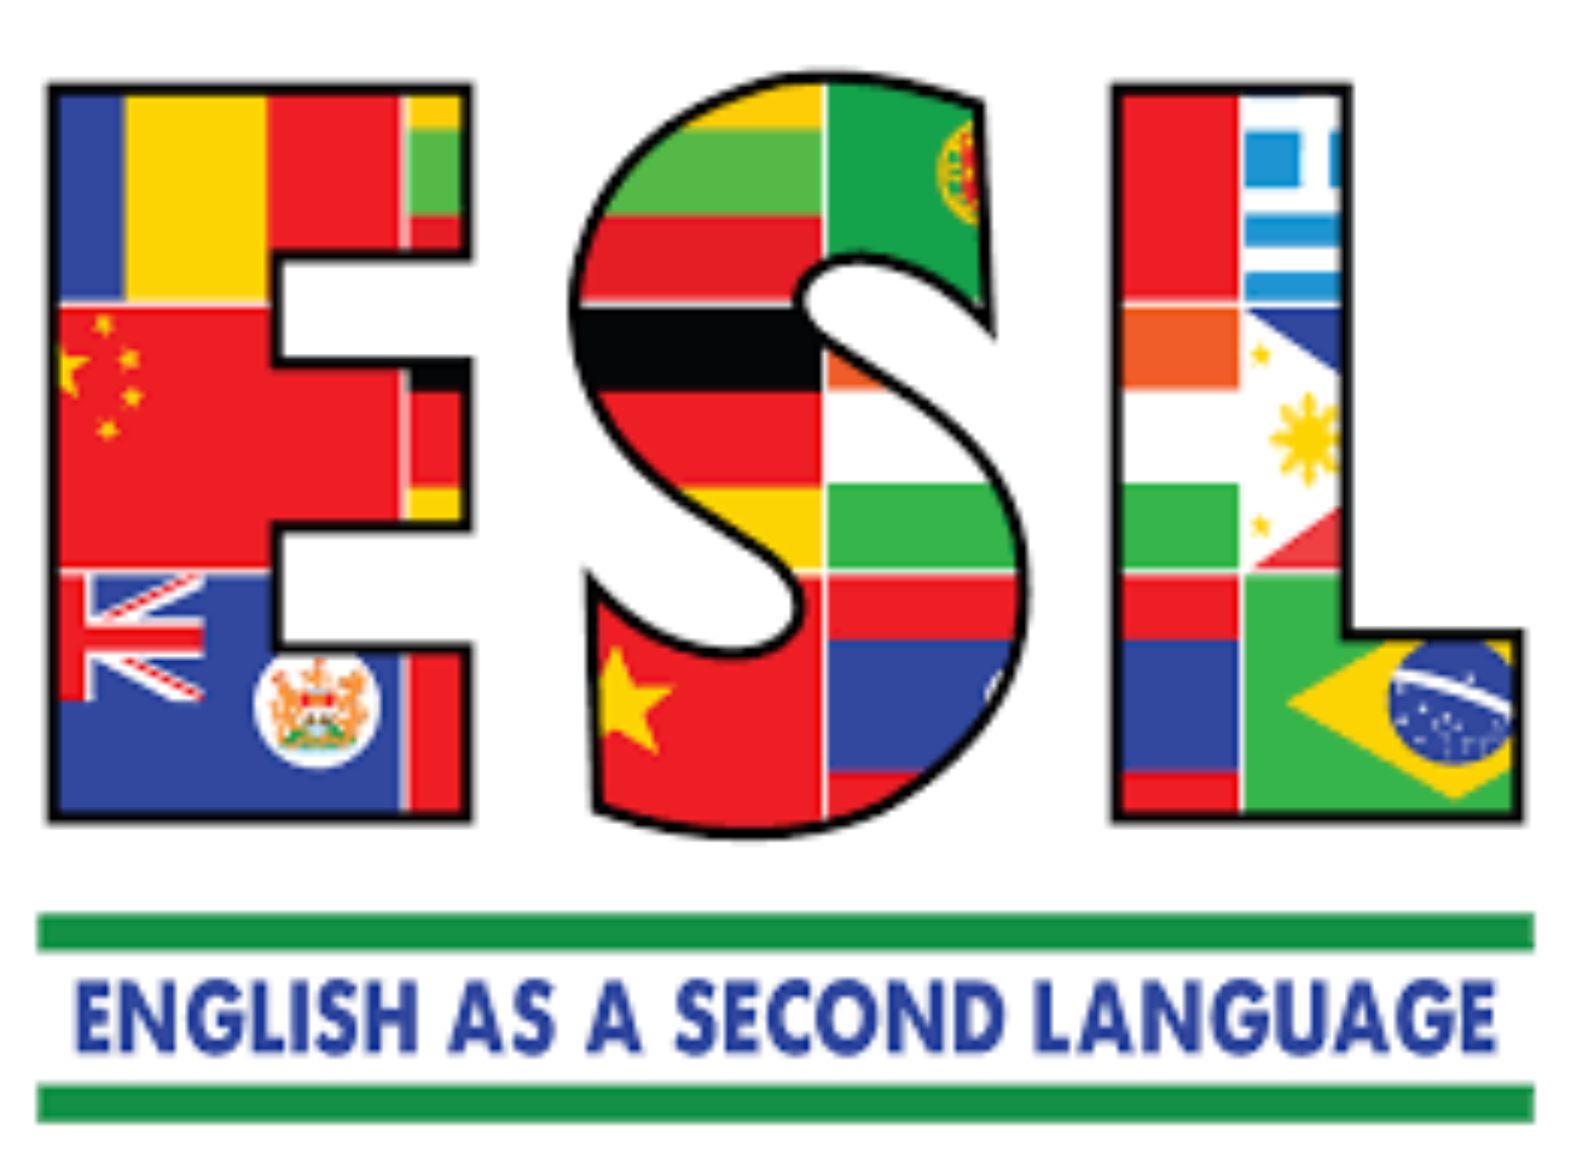 ESL with Flags in the letters